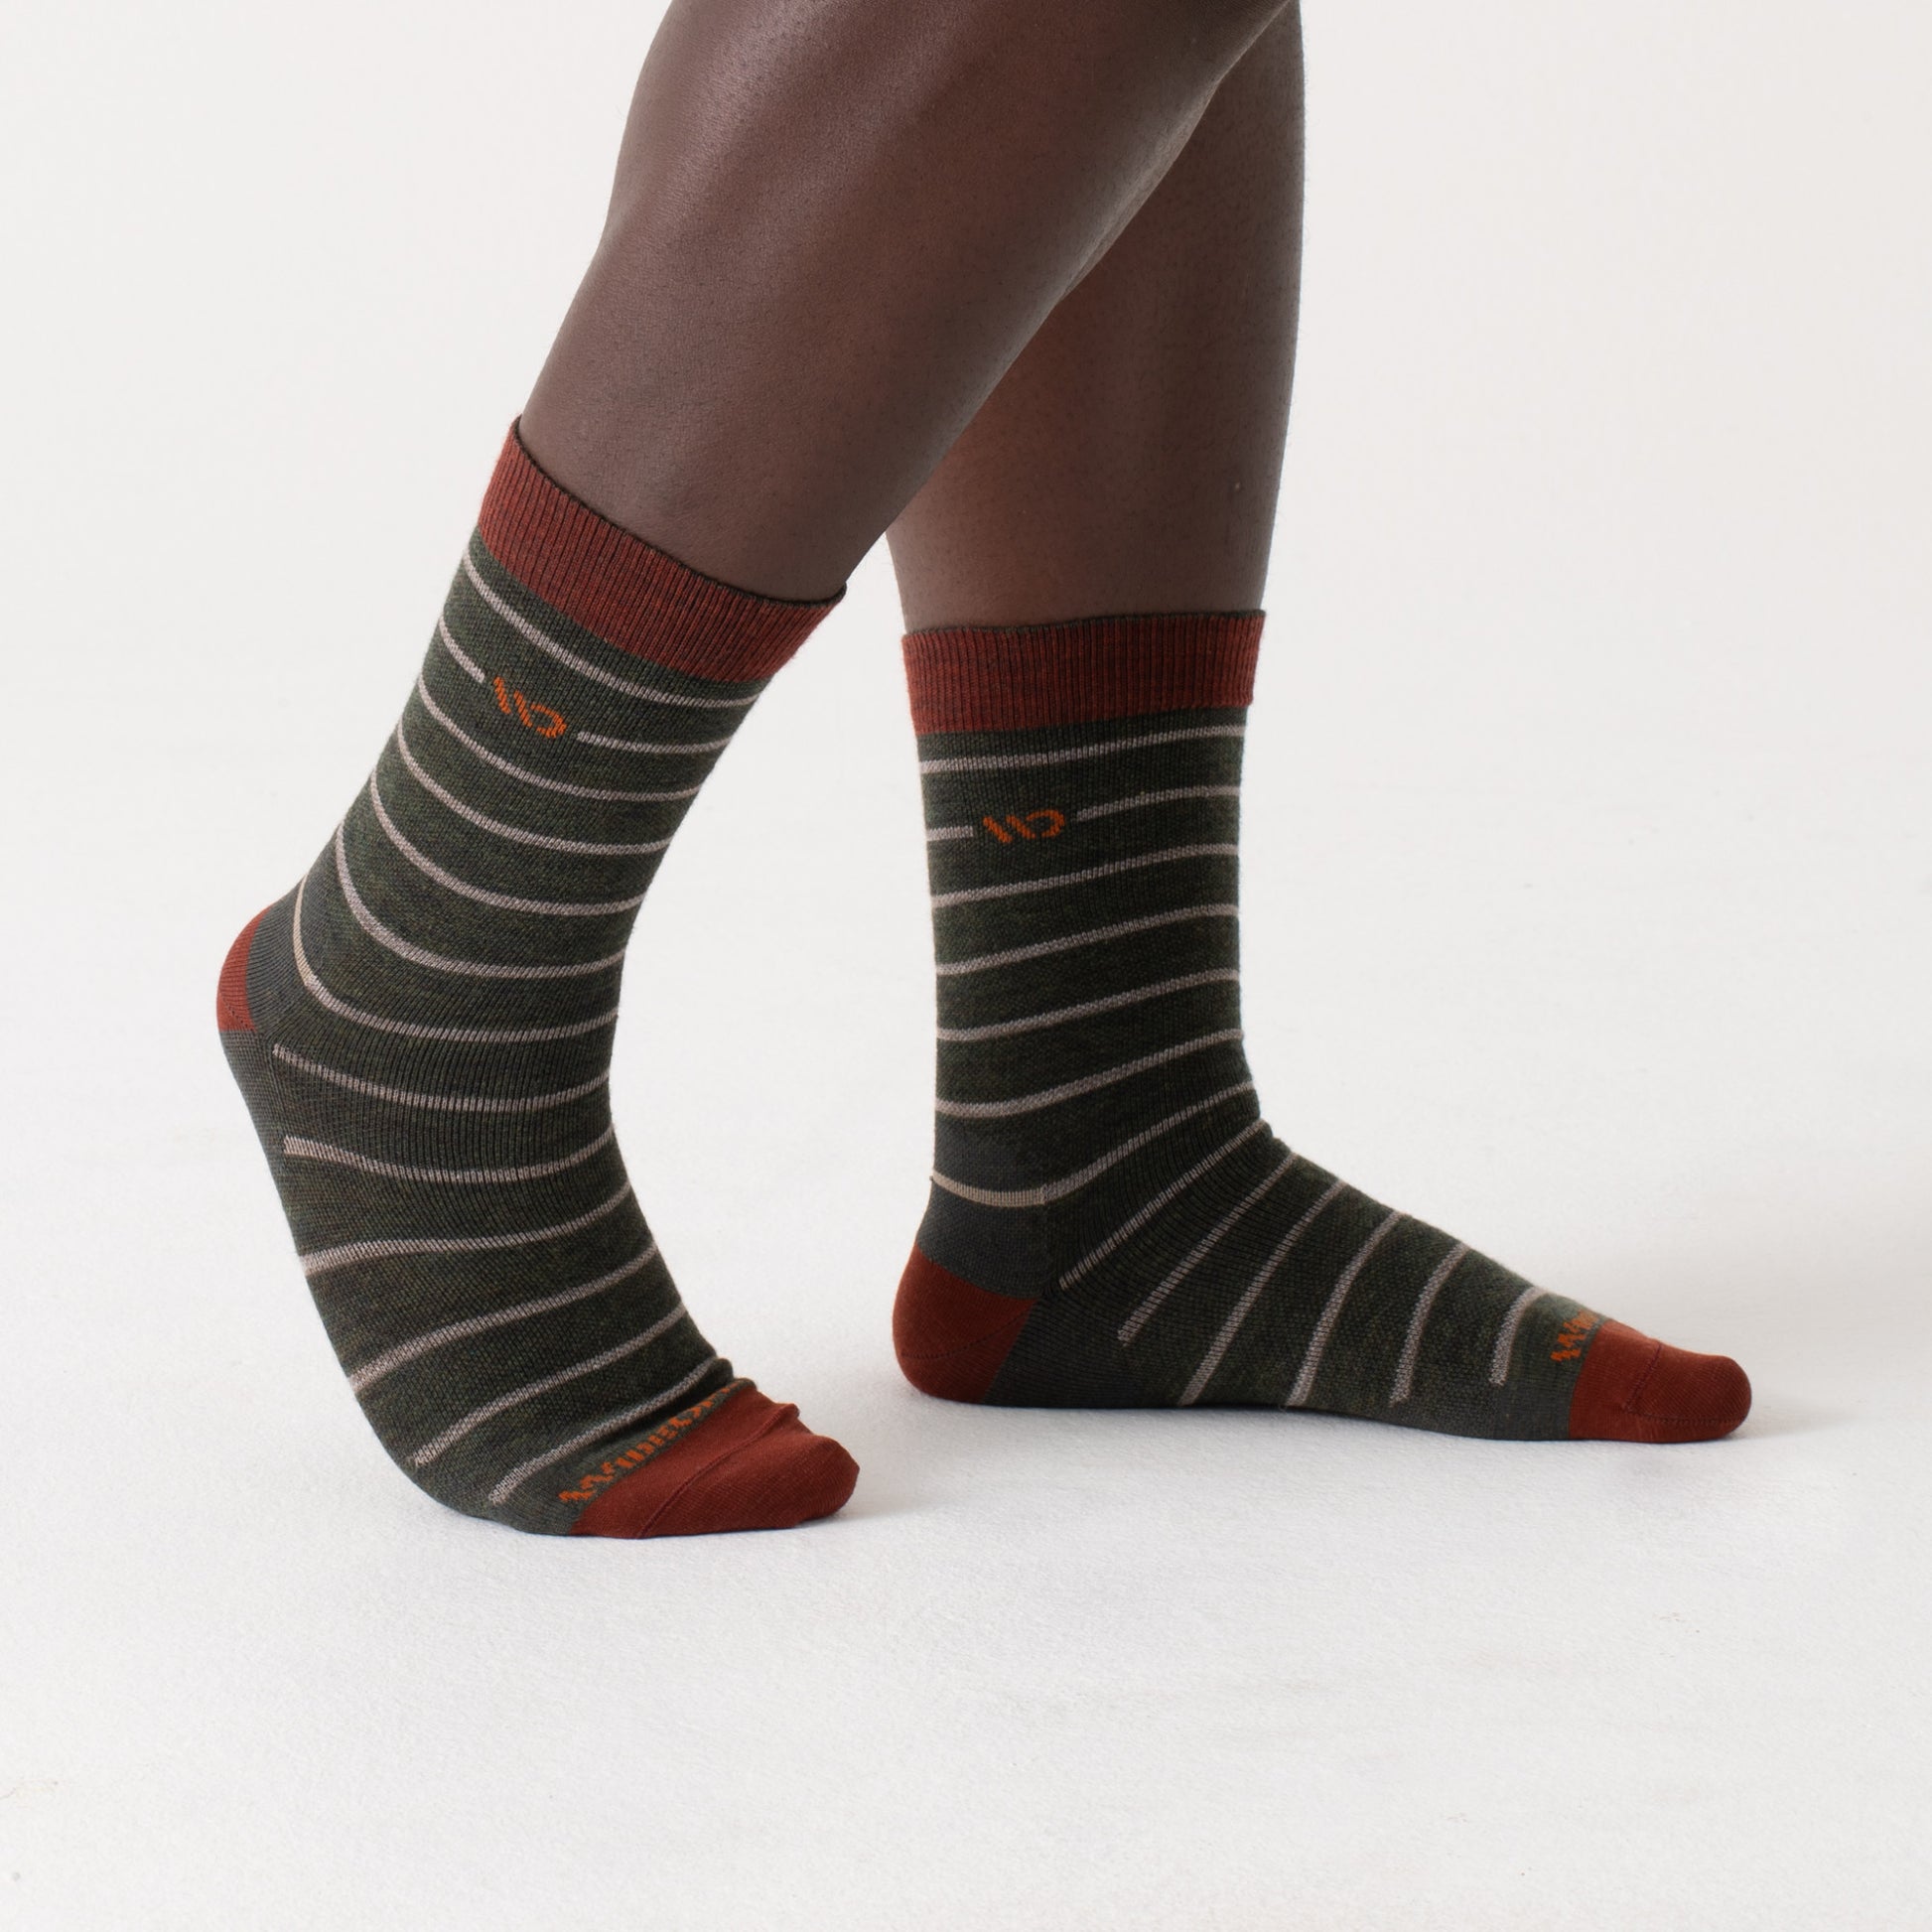 Profile of Crew socks with maroon toe, orange logo, forest body and gray stripes--Forest